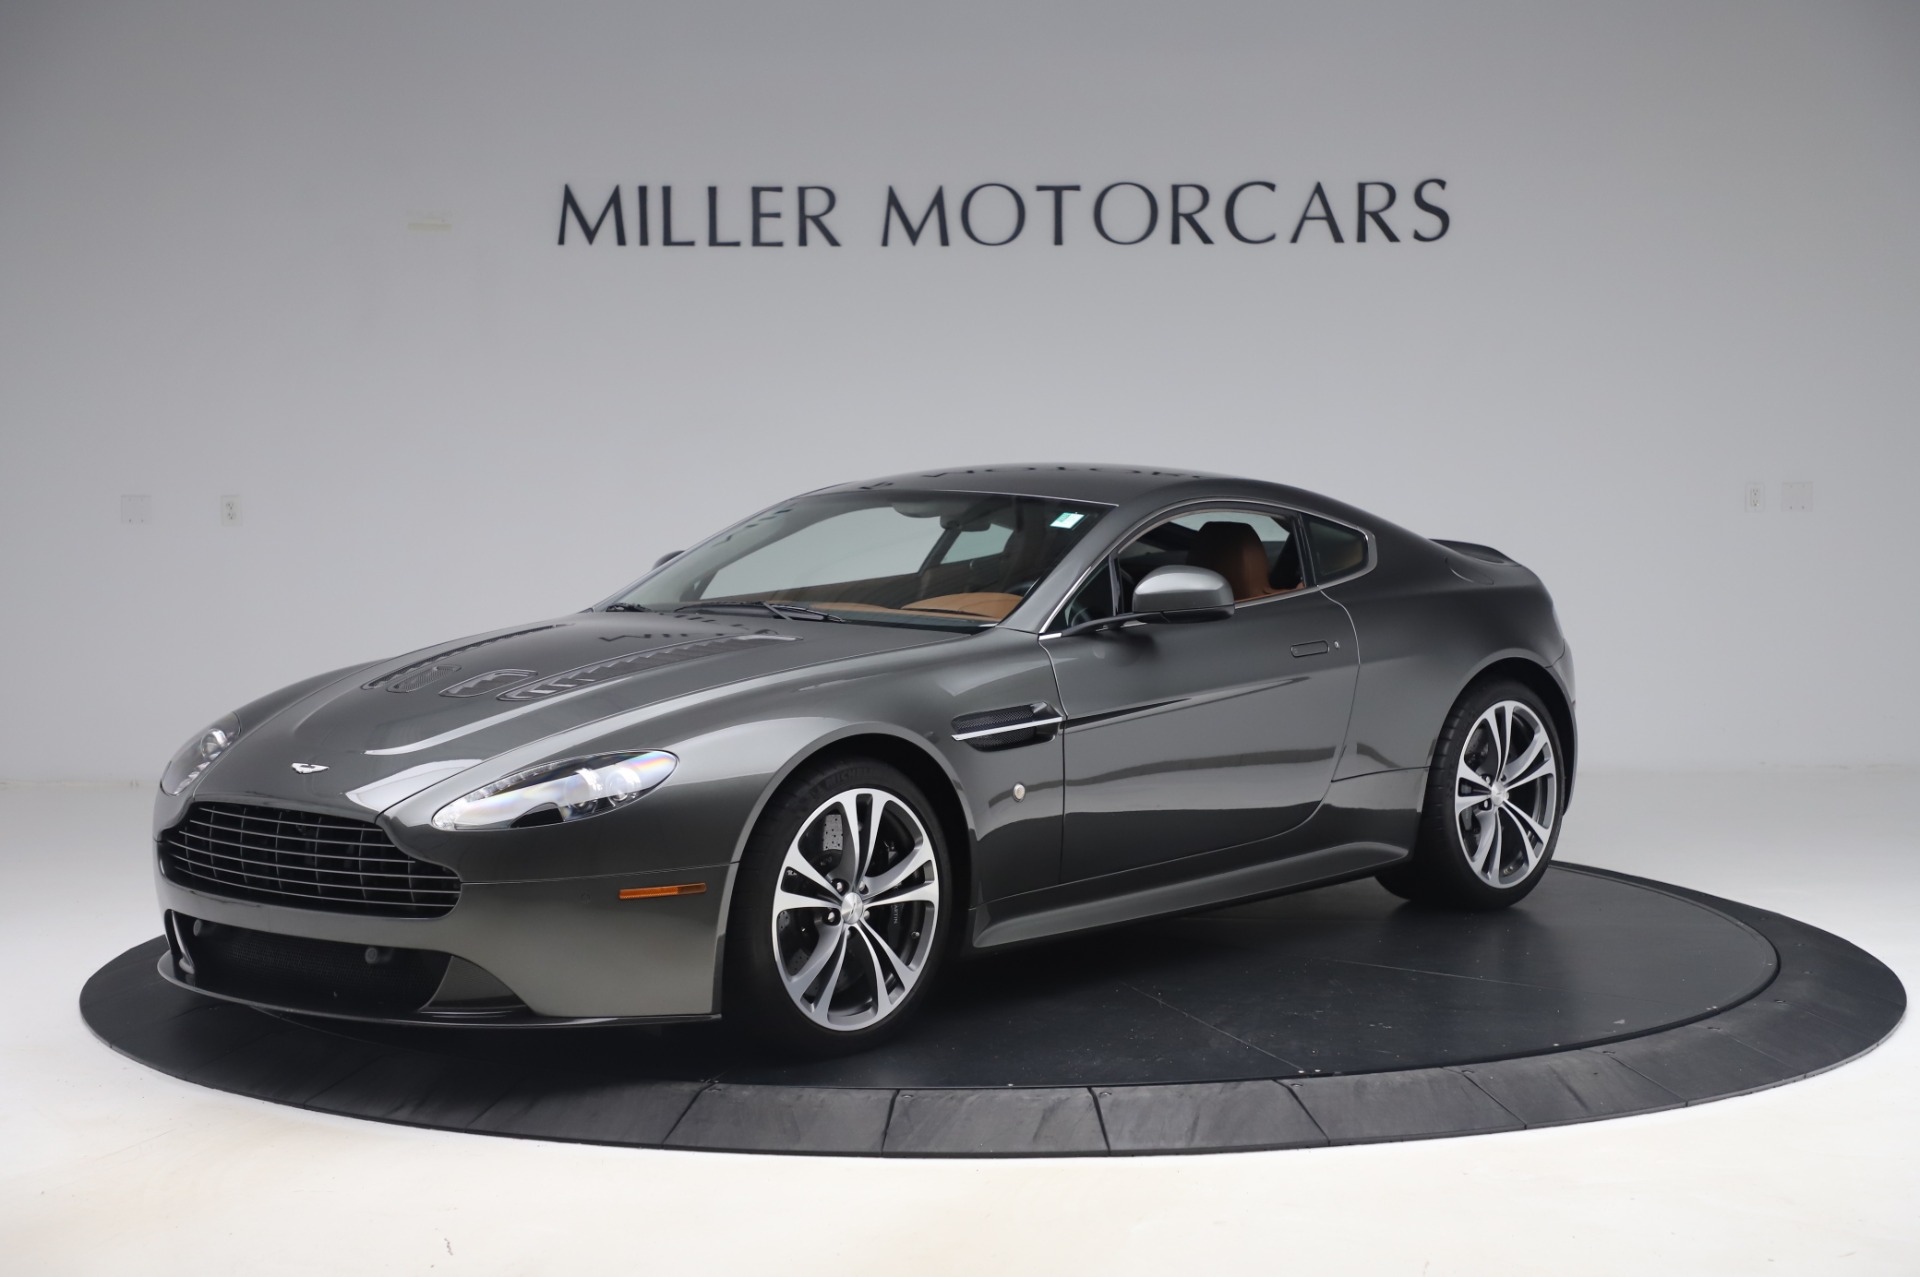 Used 2011 Aston Martin V12 Vantage Coupe for sale Sold at Pagani of Greenwich in Greenwich CT 06830 1